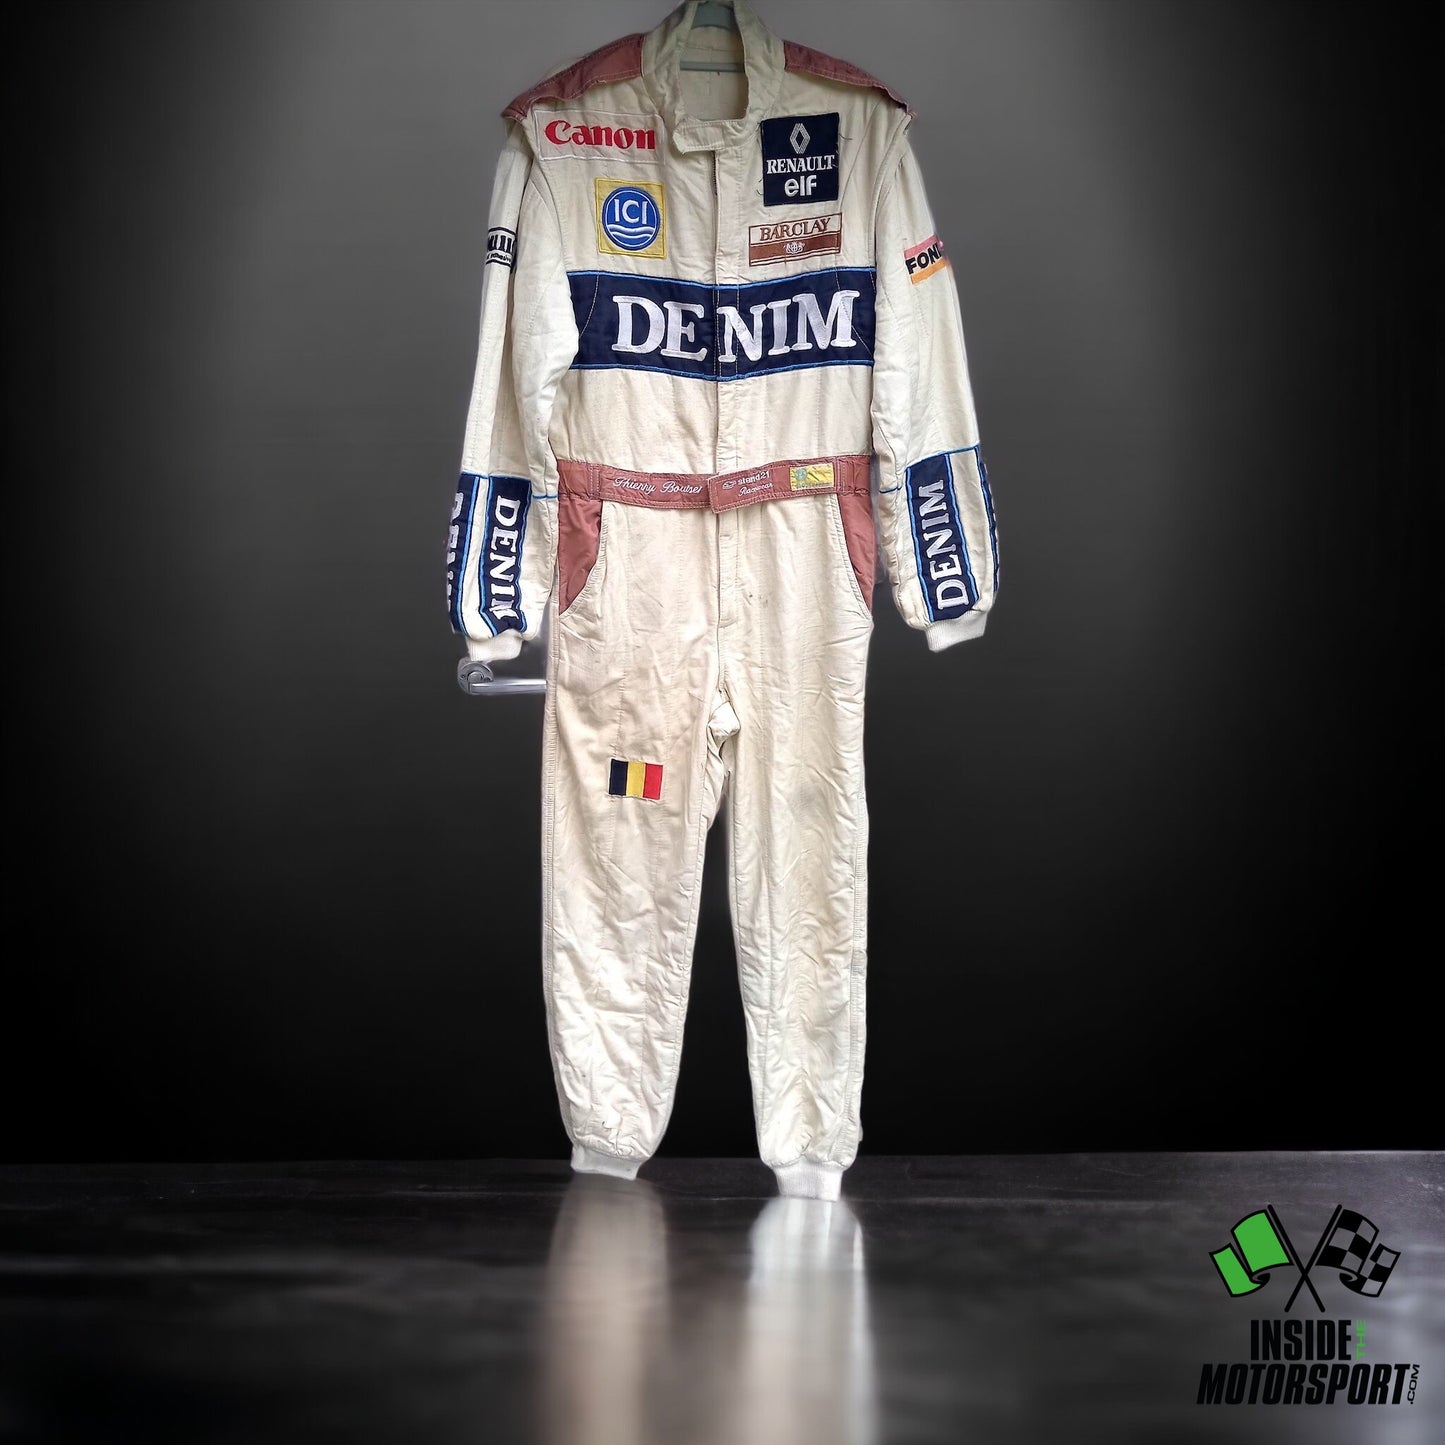 1989 Thierry Boutsen Race Suit - Williams F1 - Renault F1